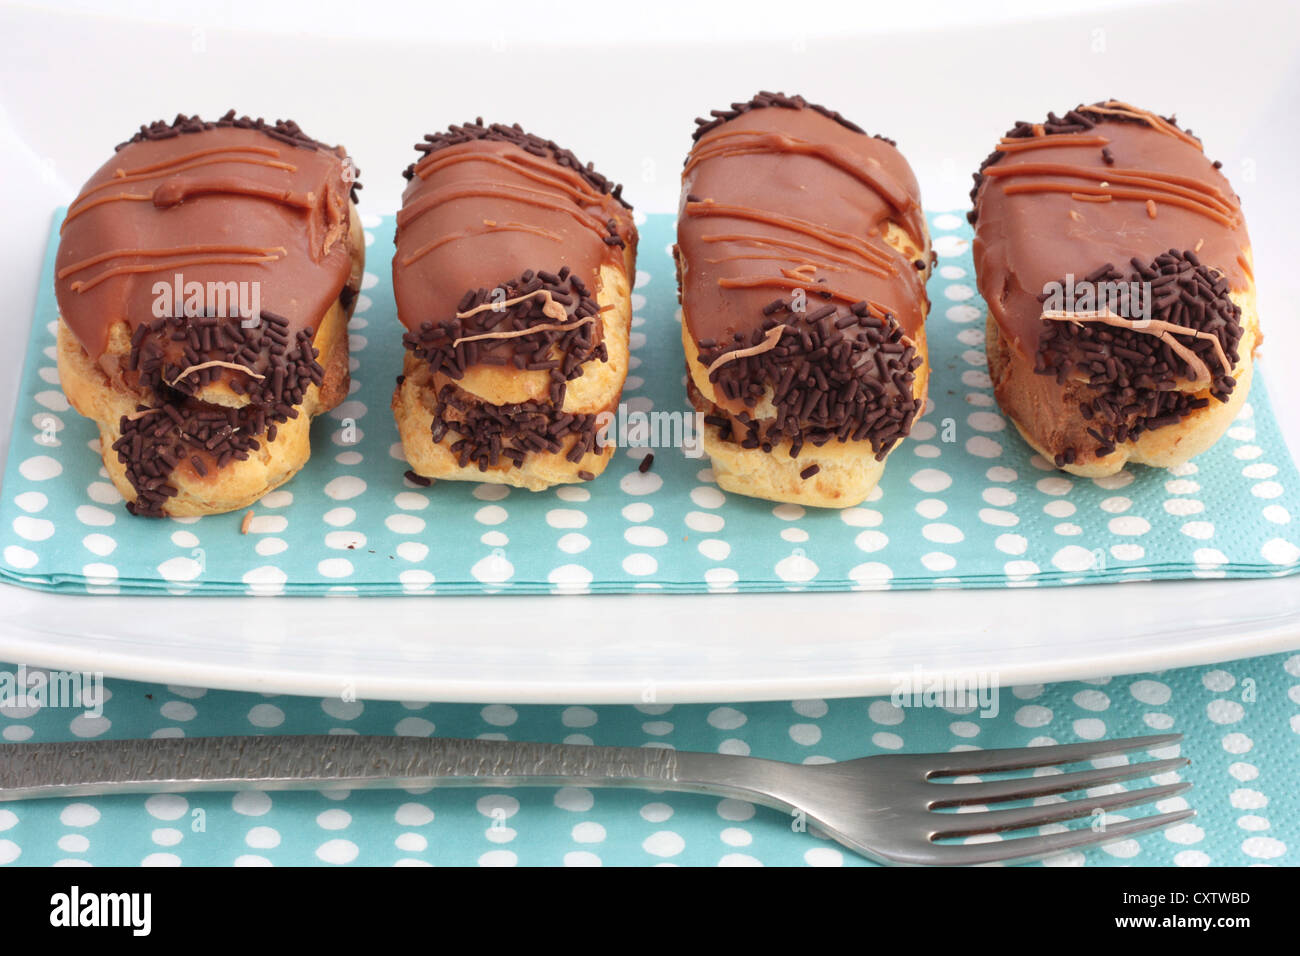 A plate of chocolate eclairs or choux pastry filled with chocolate cream and covered in chocolate icing. Stock Photo